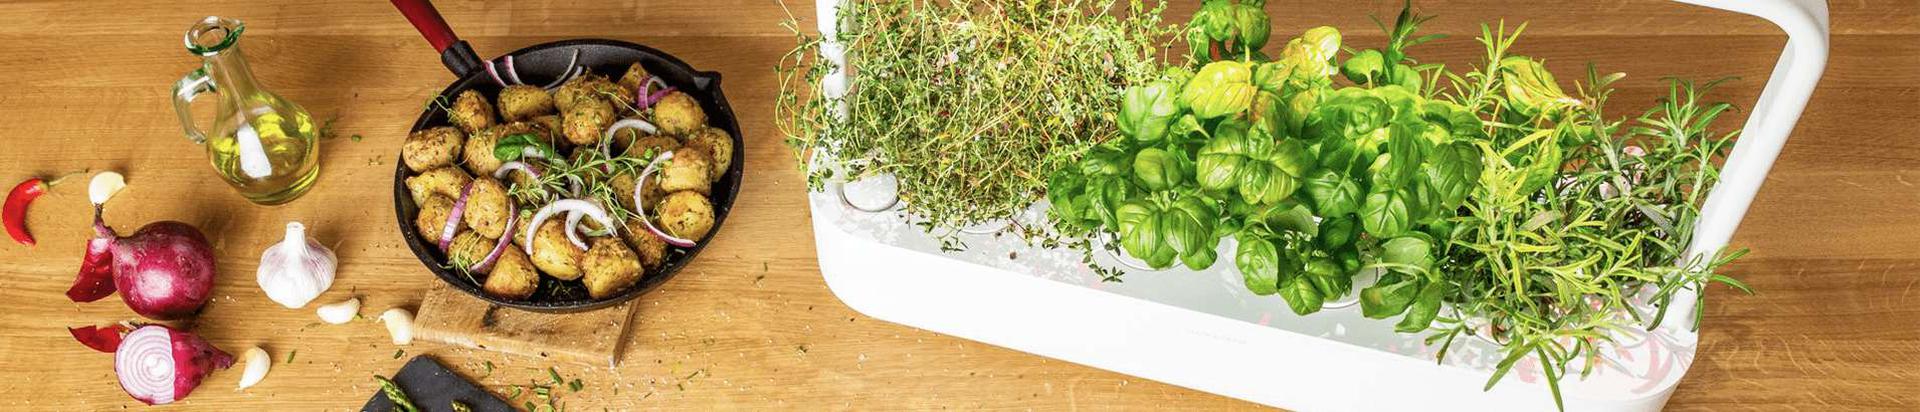 The Click & Grow Smart Indoor Gardens are the most advanced and easiest indoor gardening solutions. Enjoy fresh herbs grown in your own indoor garden all year round.